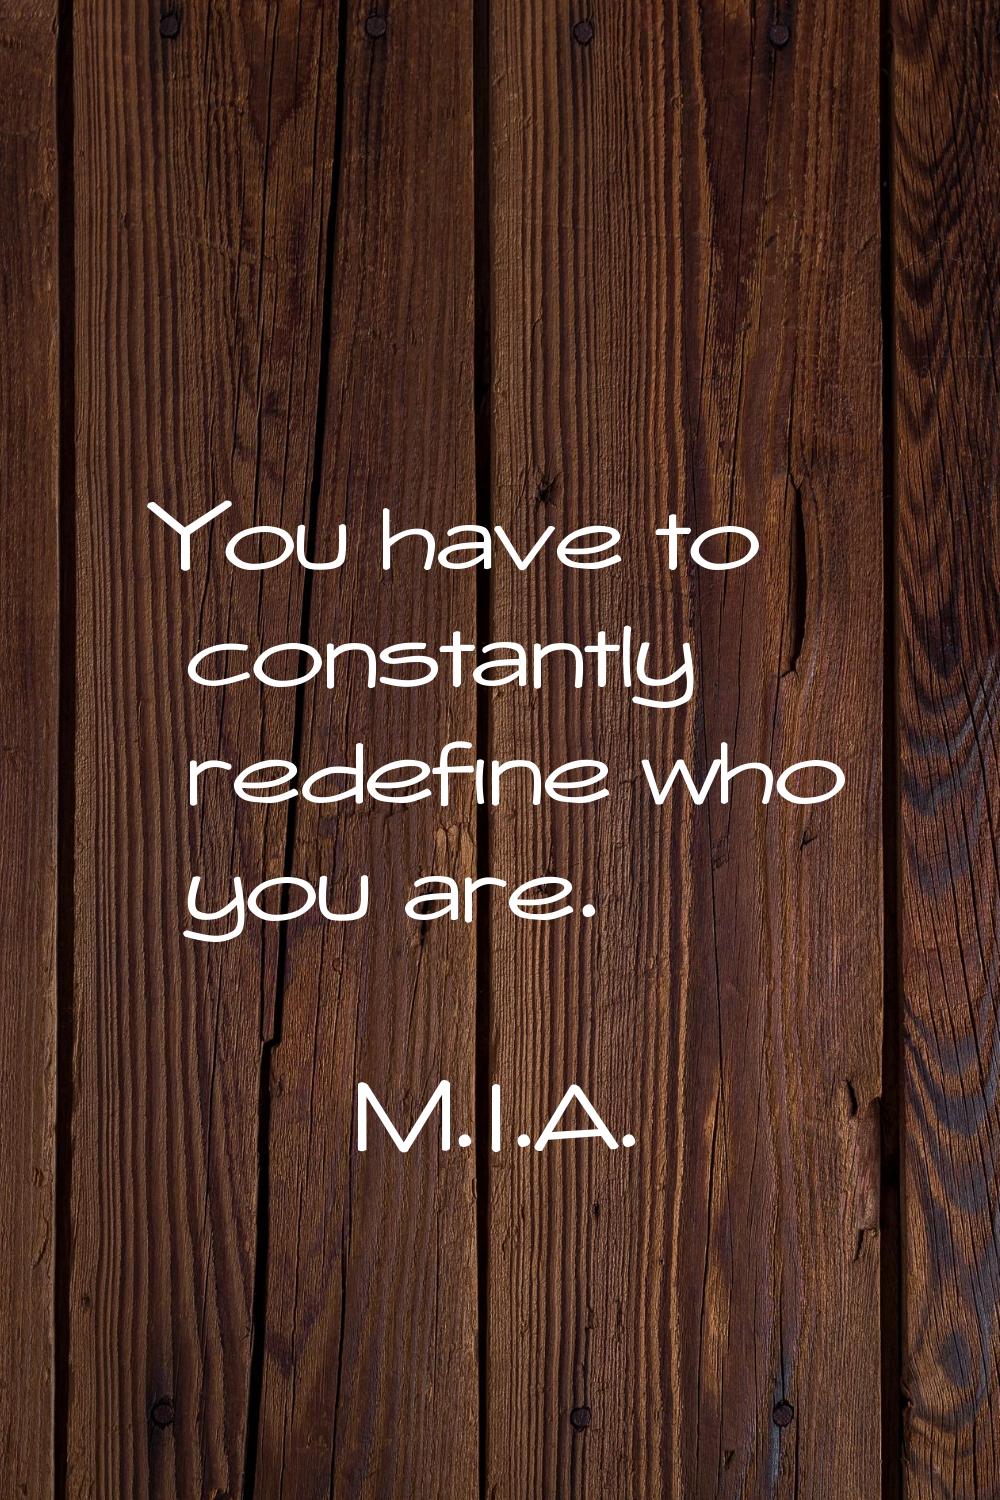 You have to constantly redefine who you are.